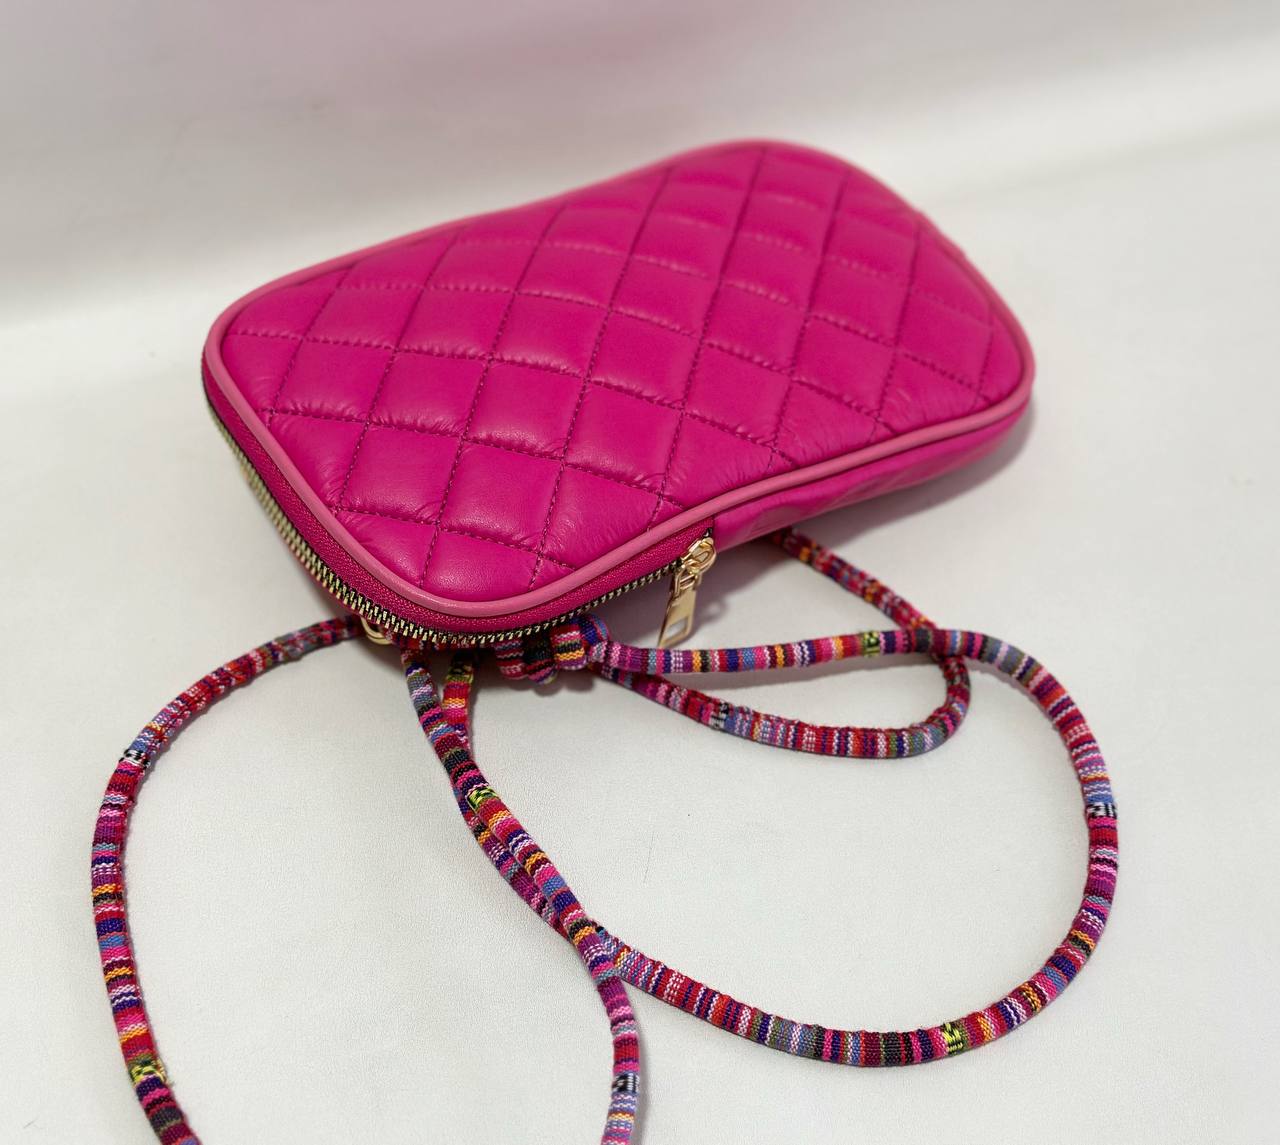 Mobile wallet with colored stripe